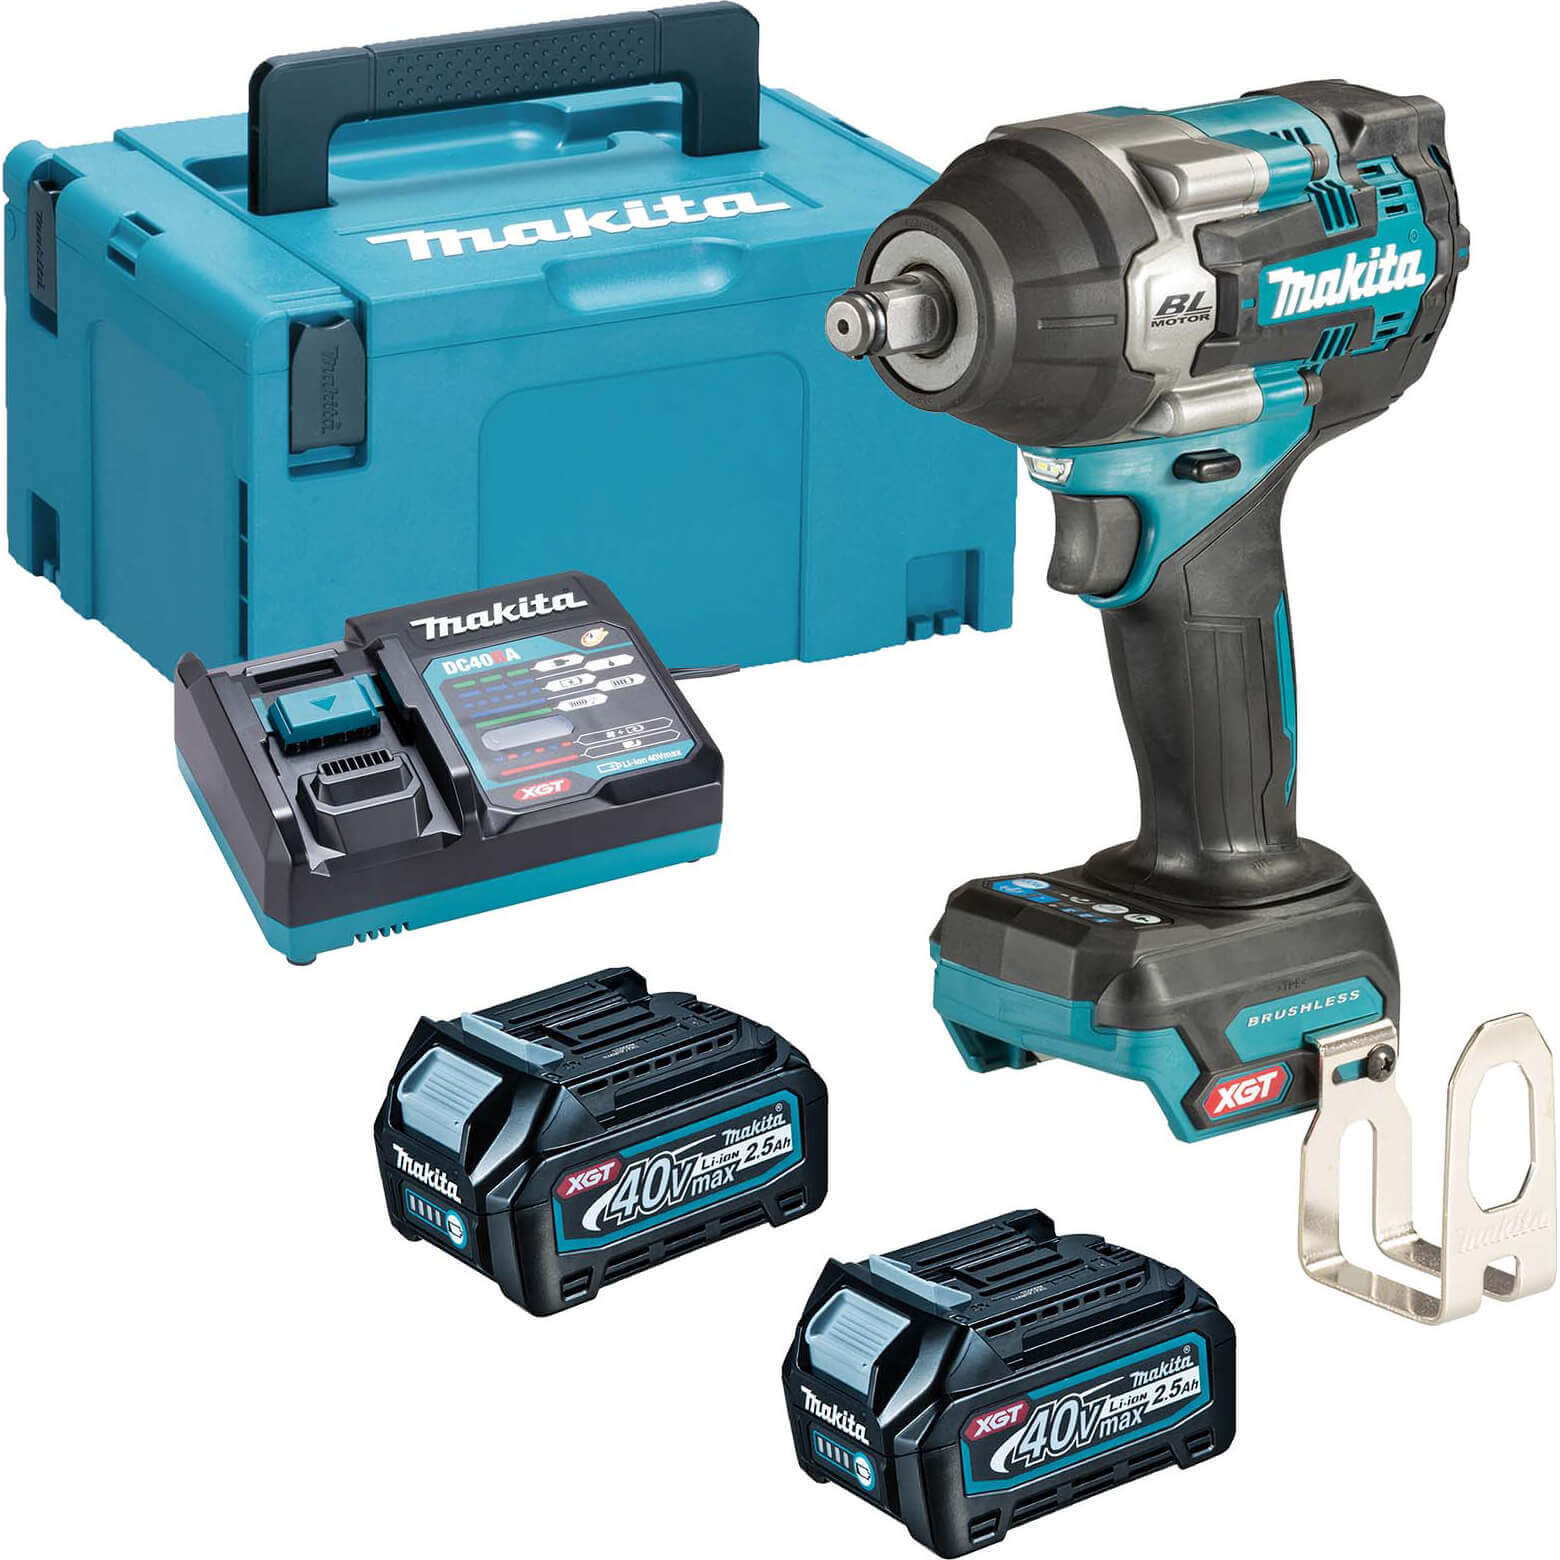 Image of Makita TW007G 40v Max XGT Cordless Brushless 1/2" Drive Impact Wrench 2 x 2.5ah Li-ion Charger Case